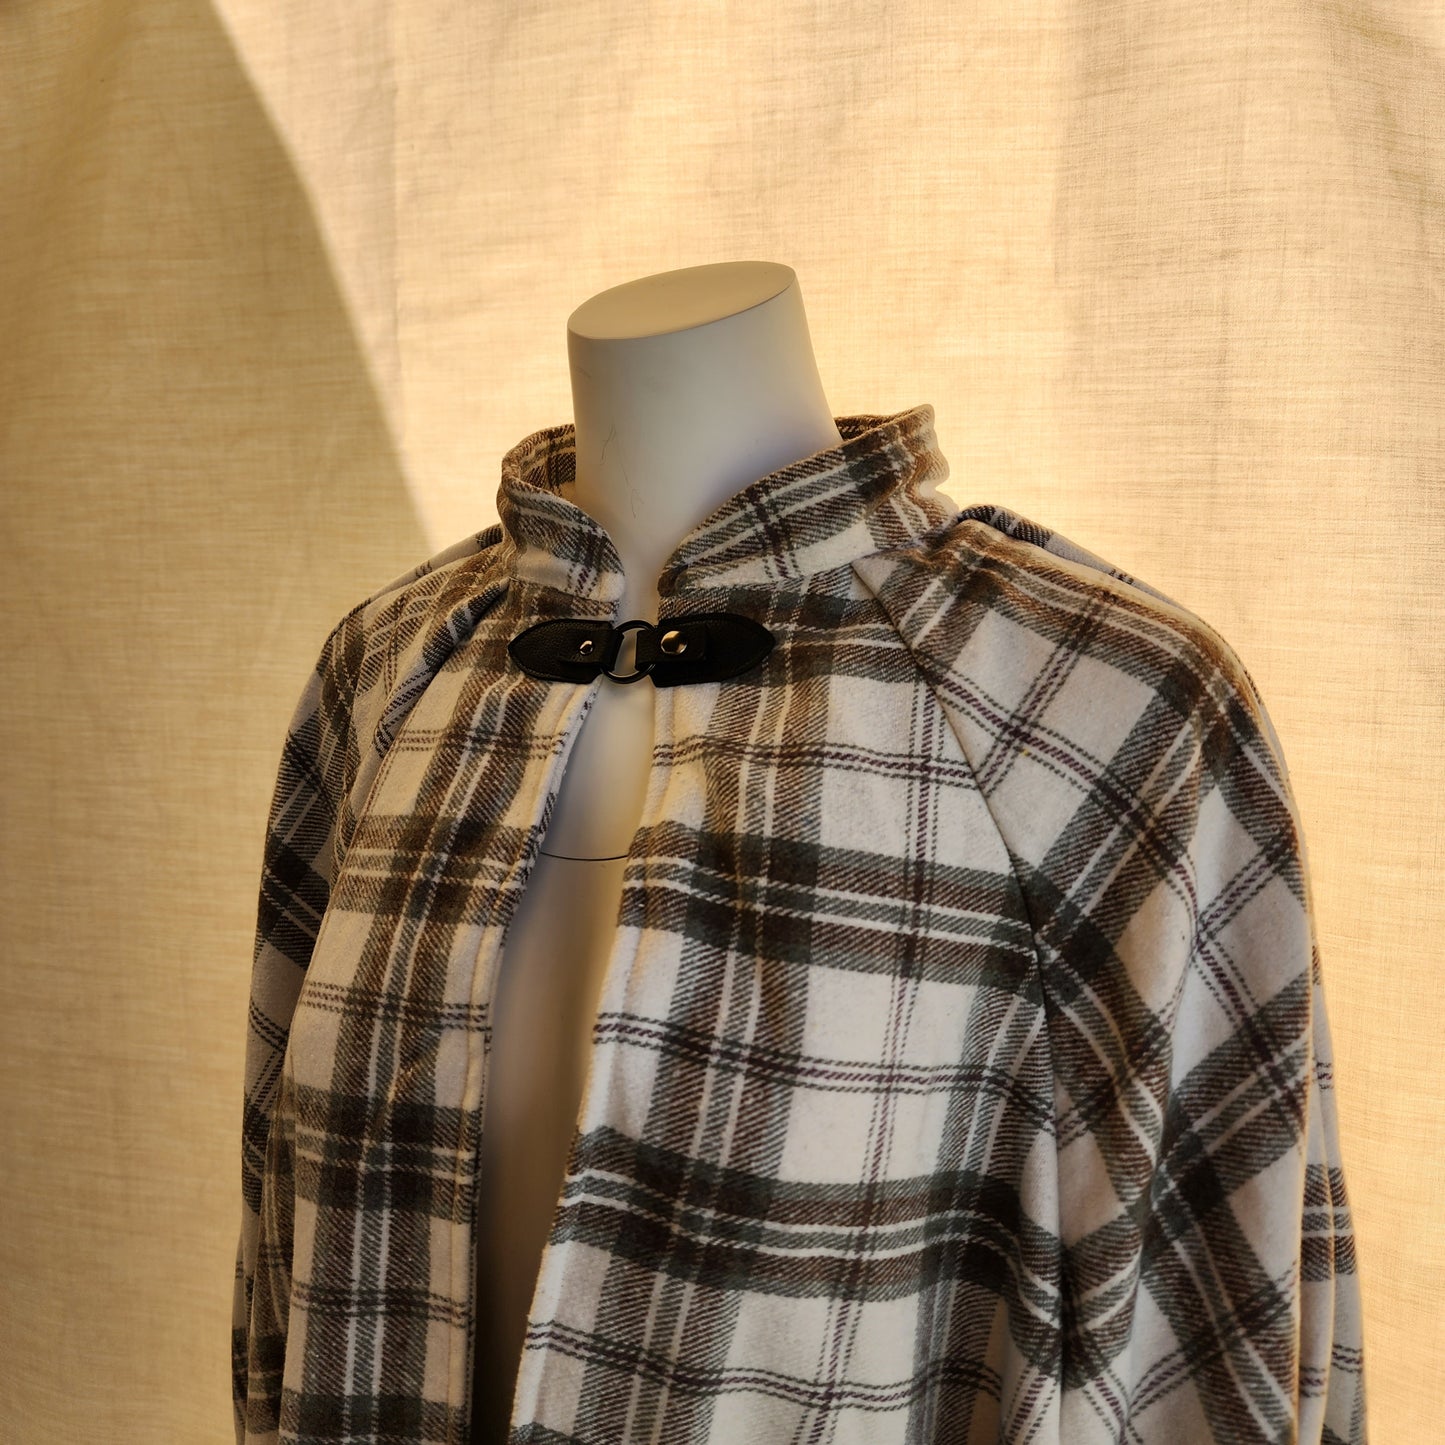 Market Day Cape- Cream Plaid Wool Blend Mid-Length Cape with Collar and Arm Slits